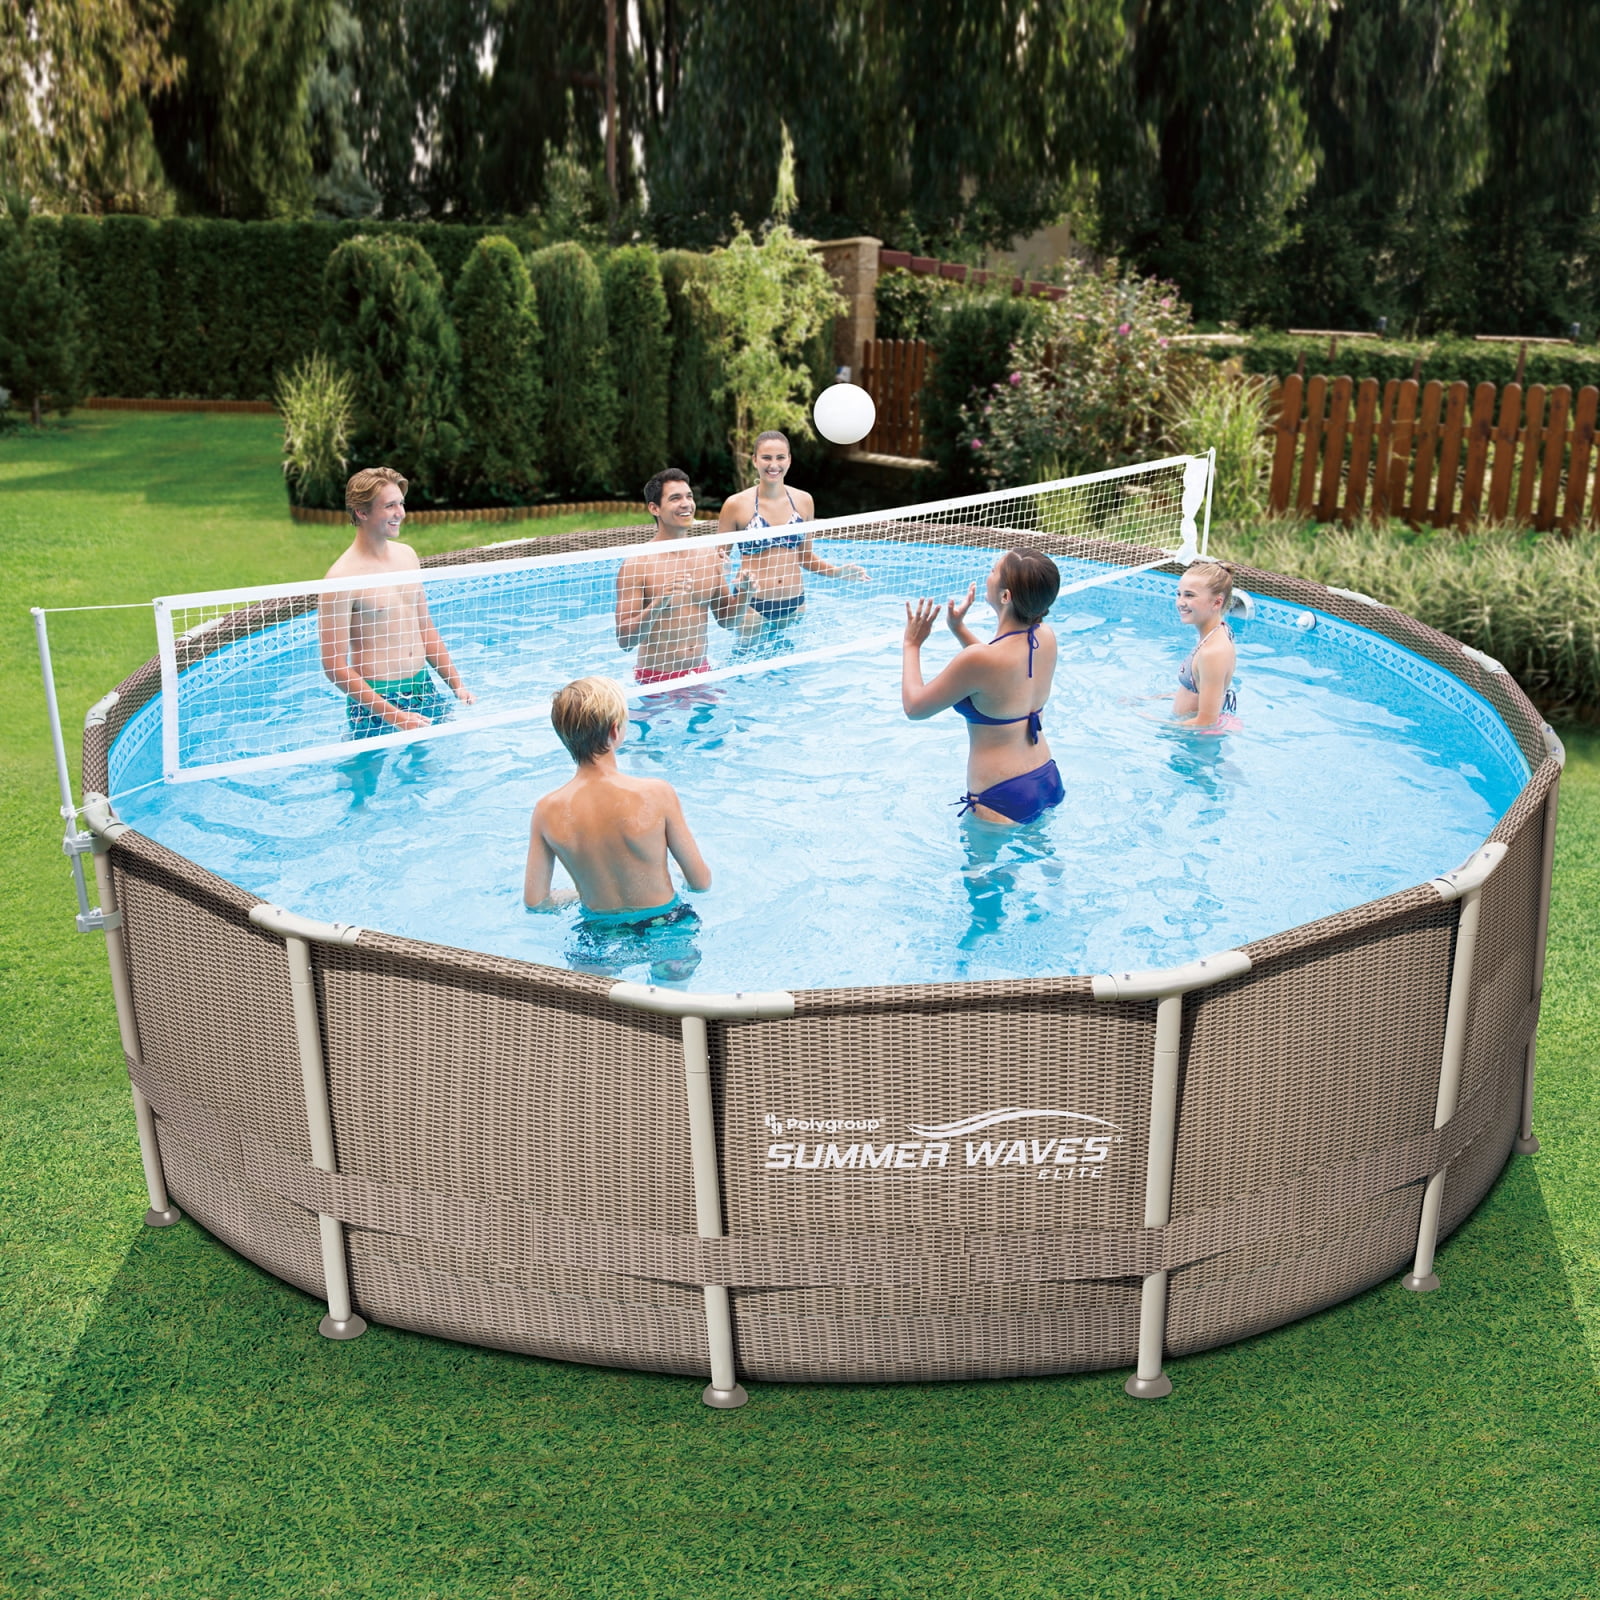 Creatice Summer Waves Above Ground Swimming Pool 